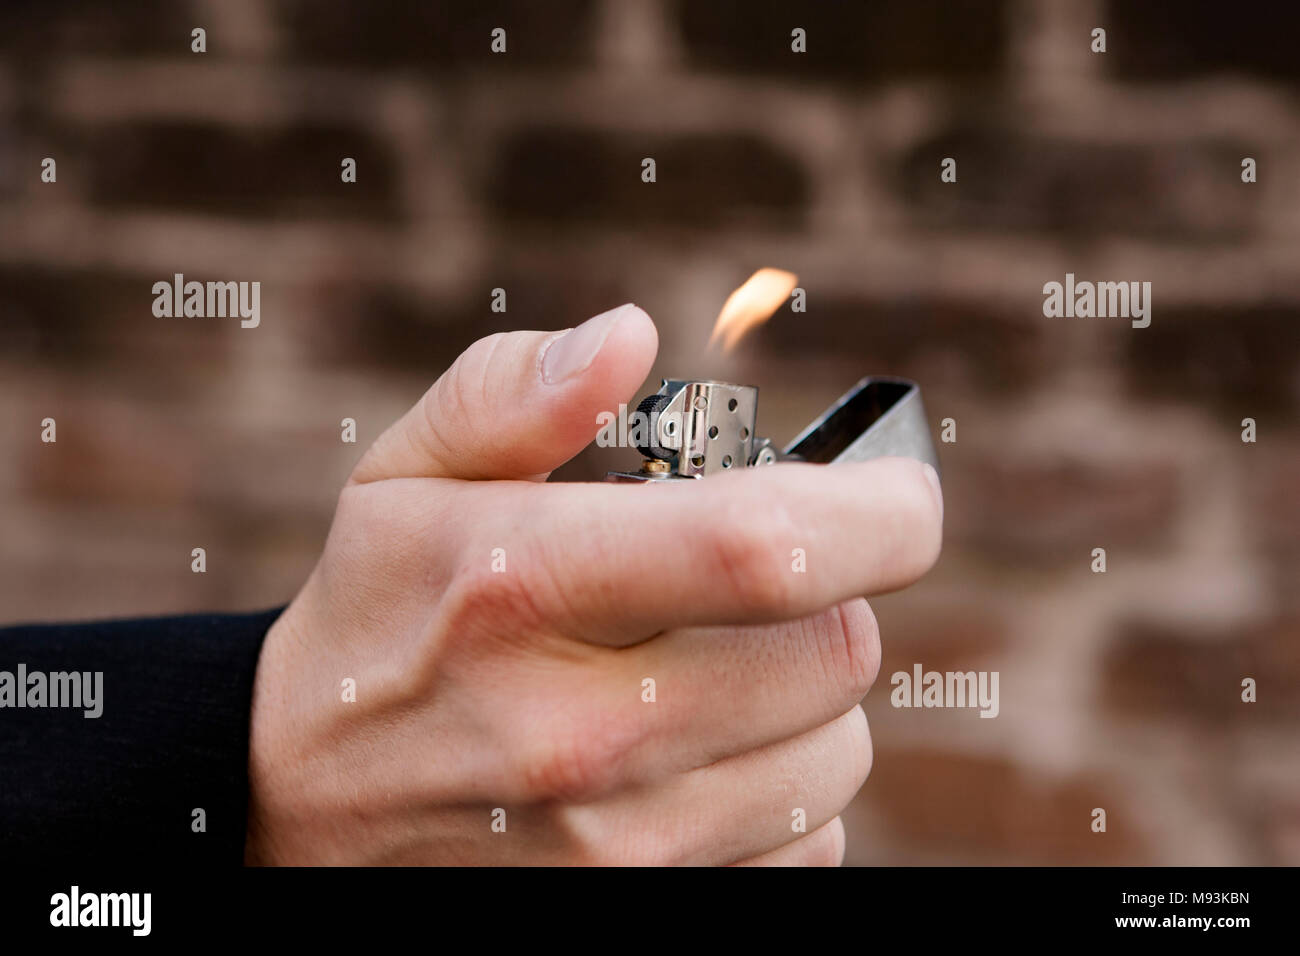 Man's hand holding a cigarette lighter Stock Photo - Alamy